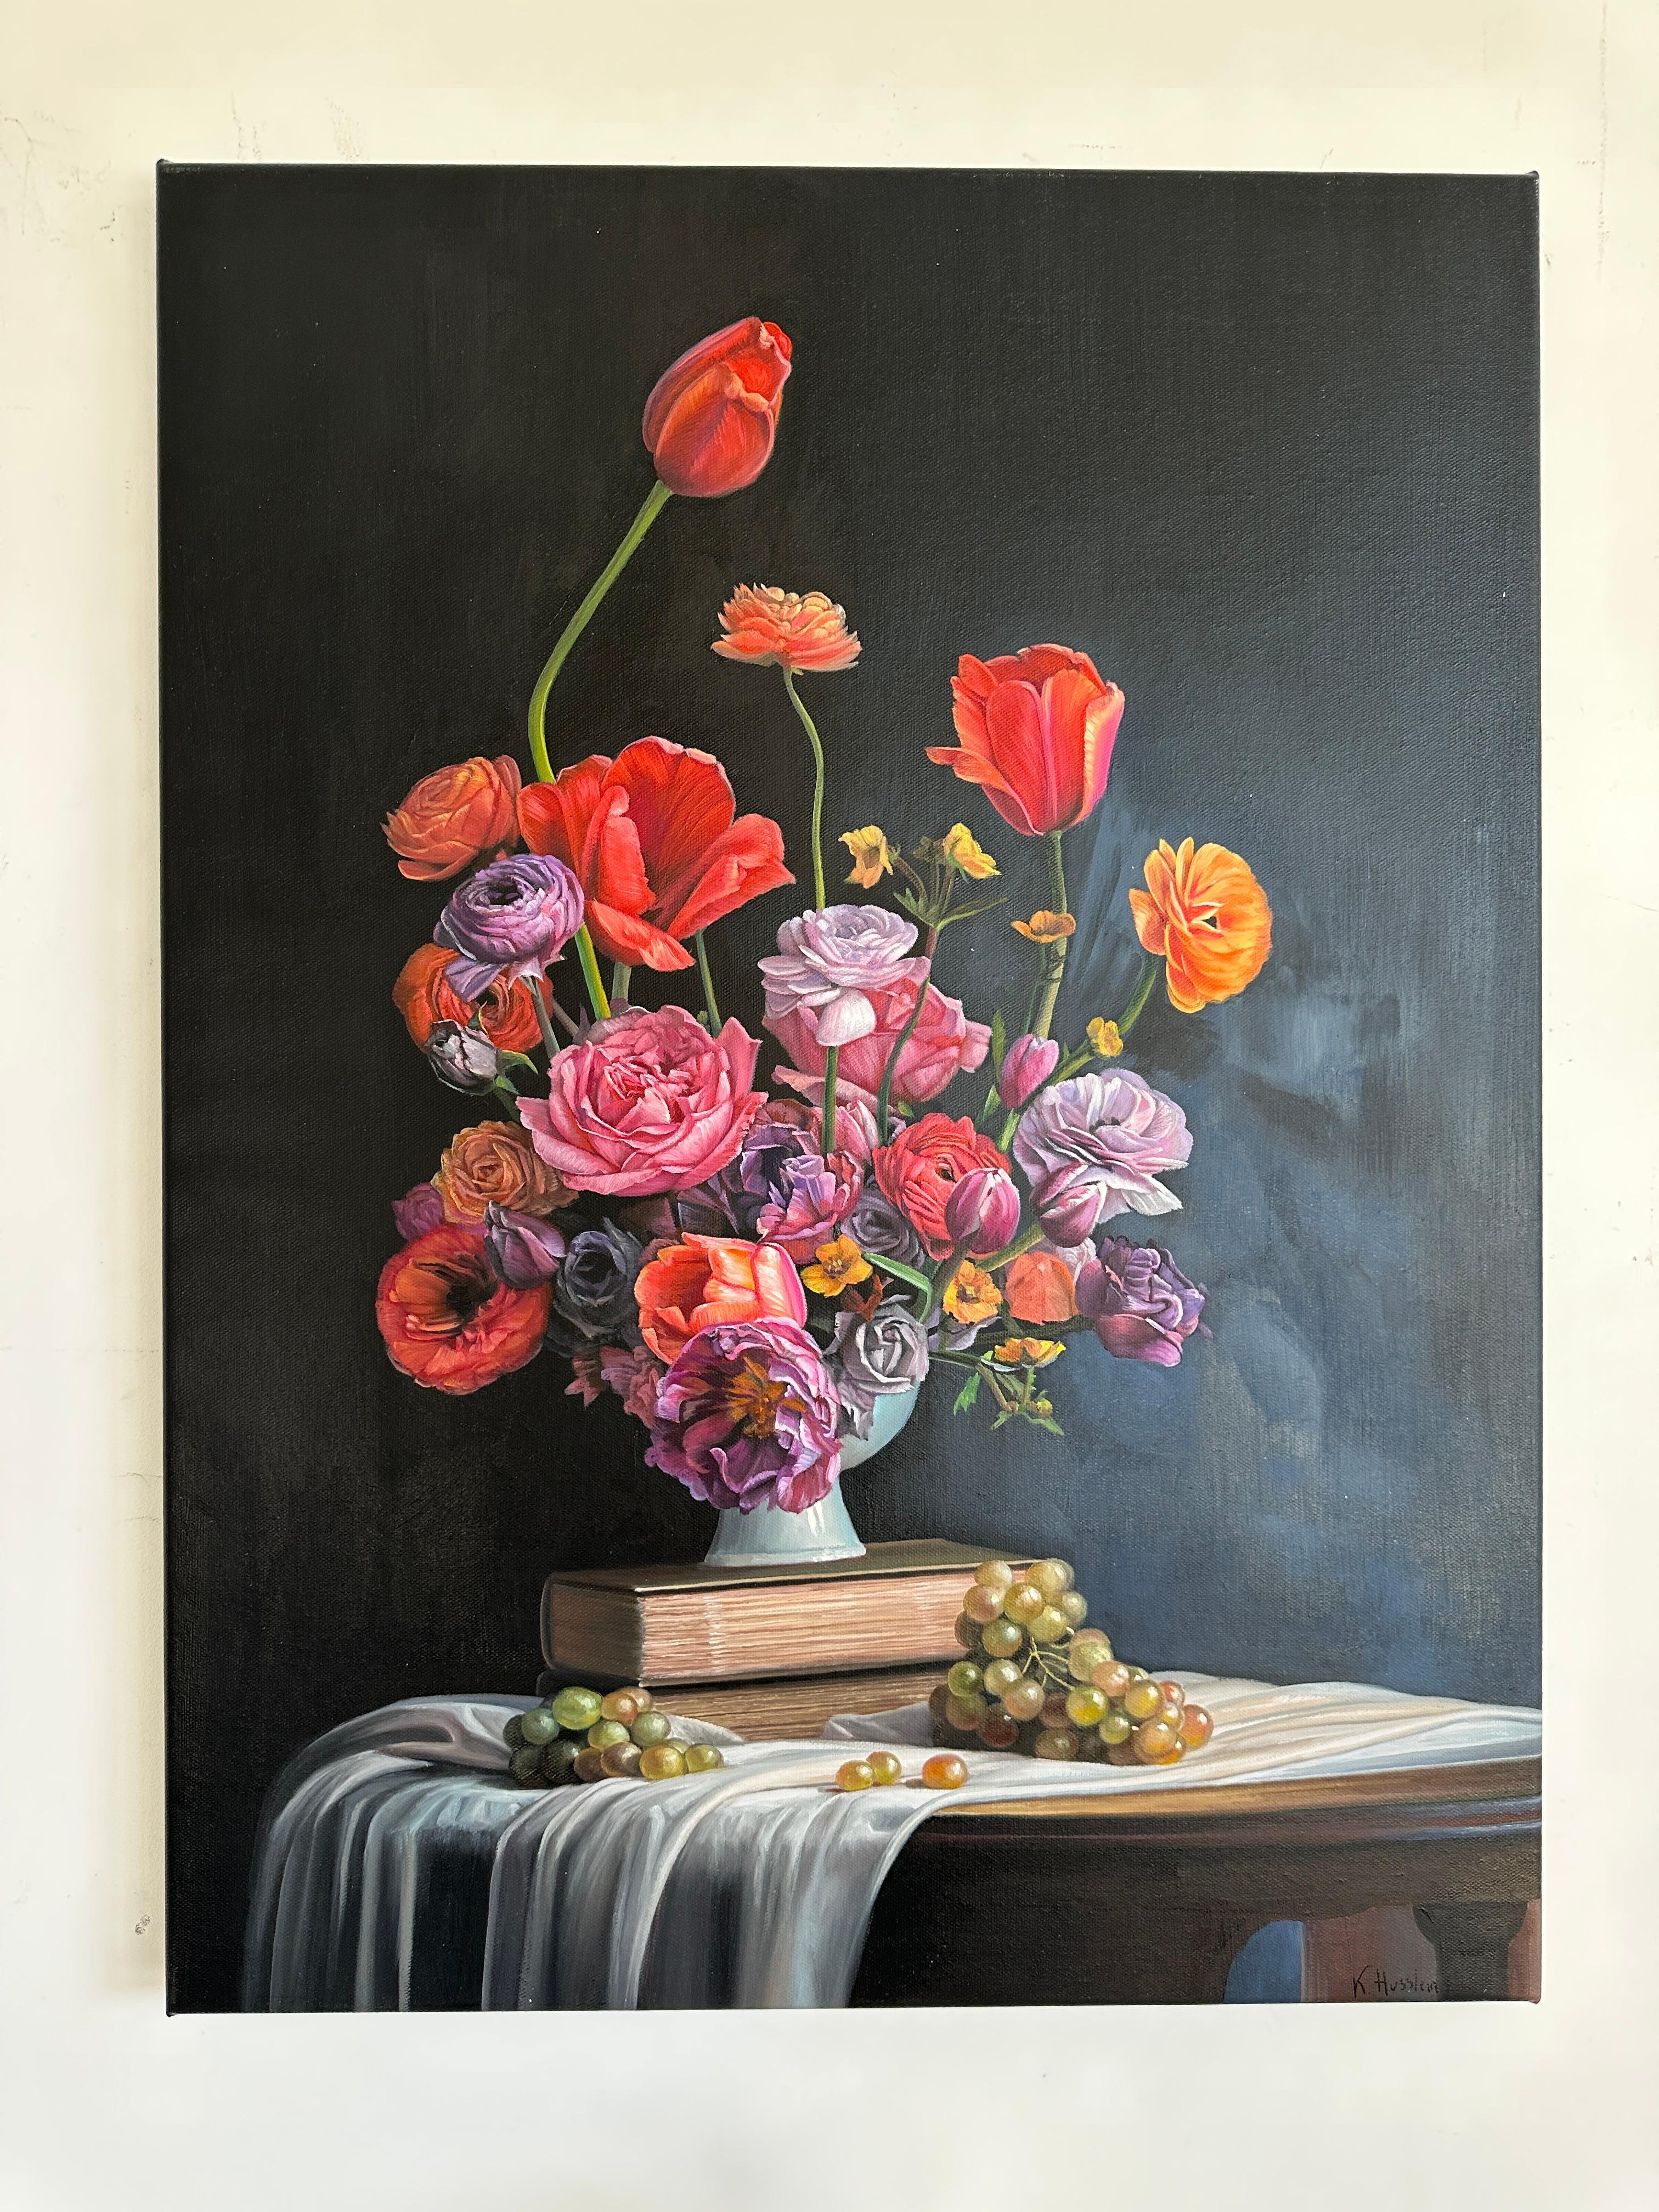 Softer Notes for Love by K Husslein Botanical Hyperrealistic Still life - Painting by Katharina Husslein